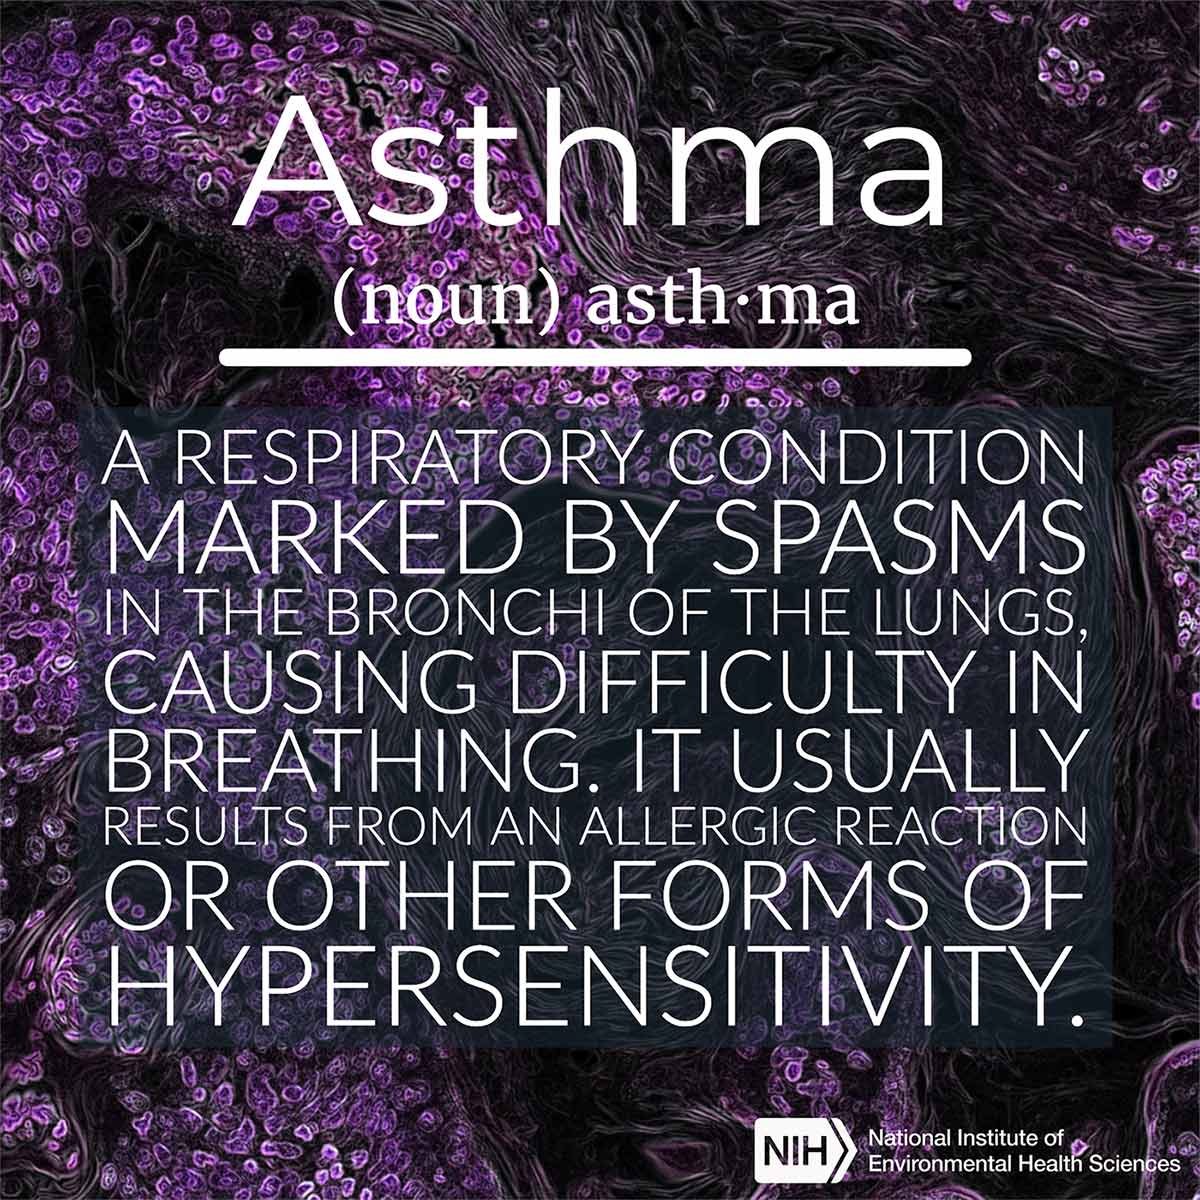 Asthma (noun) defined as 'A respiratory condition marked by spasms in the bronchi of the lungs, causing difficulty breathing. It usually results from an allergic reaction or other forms of hypersensitivity.'